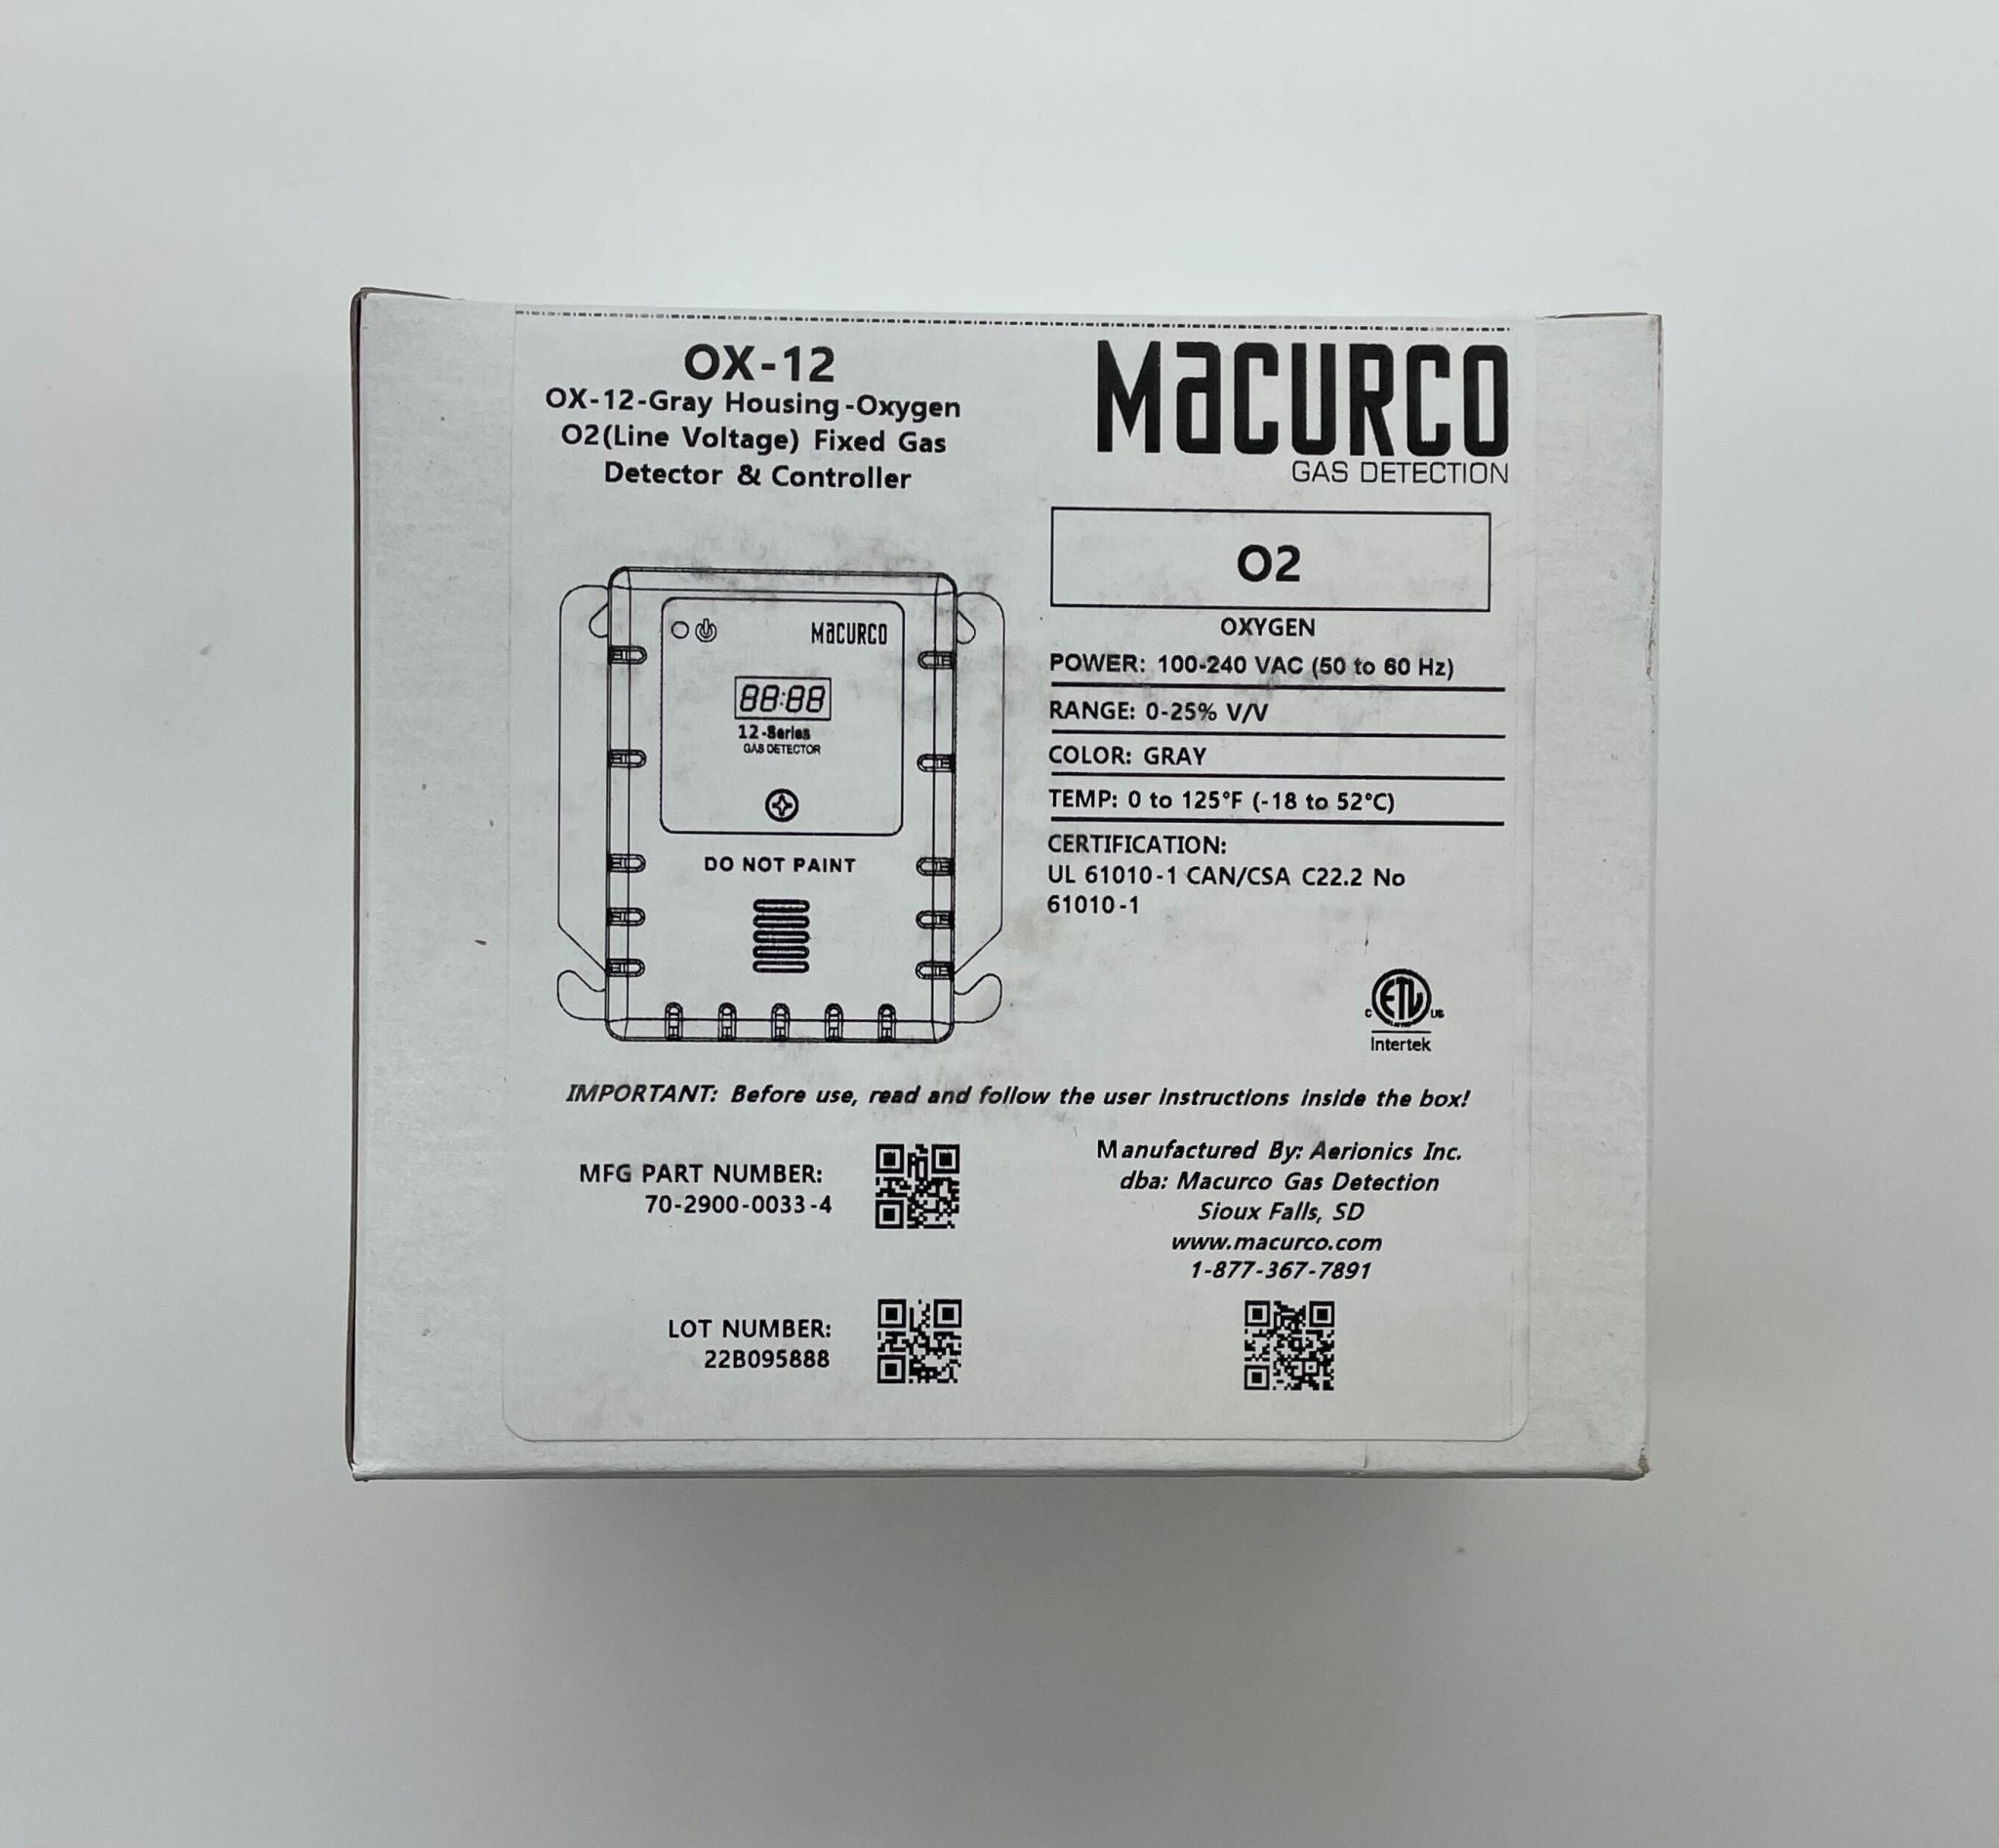 Macurco OX-12 - The Fire Alarm Supplier